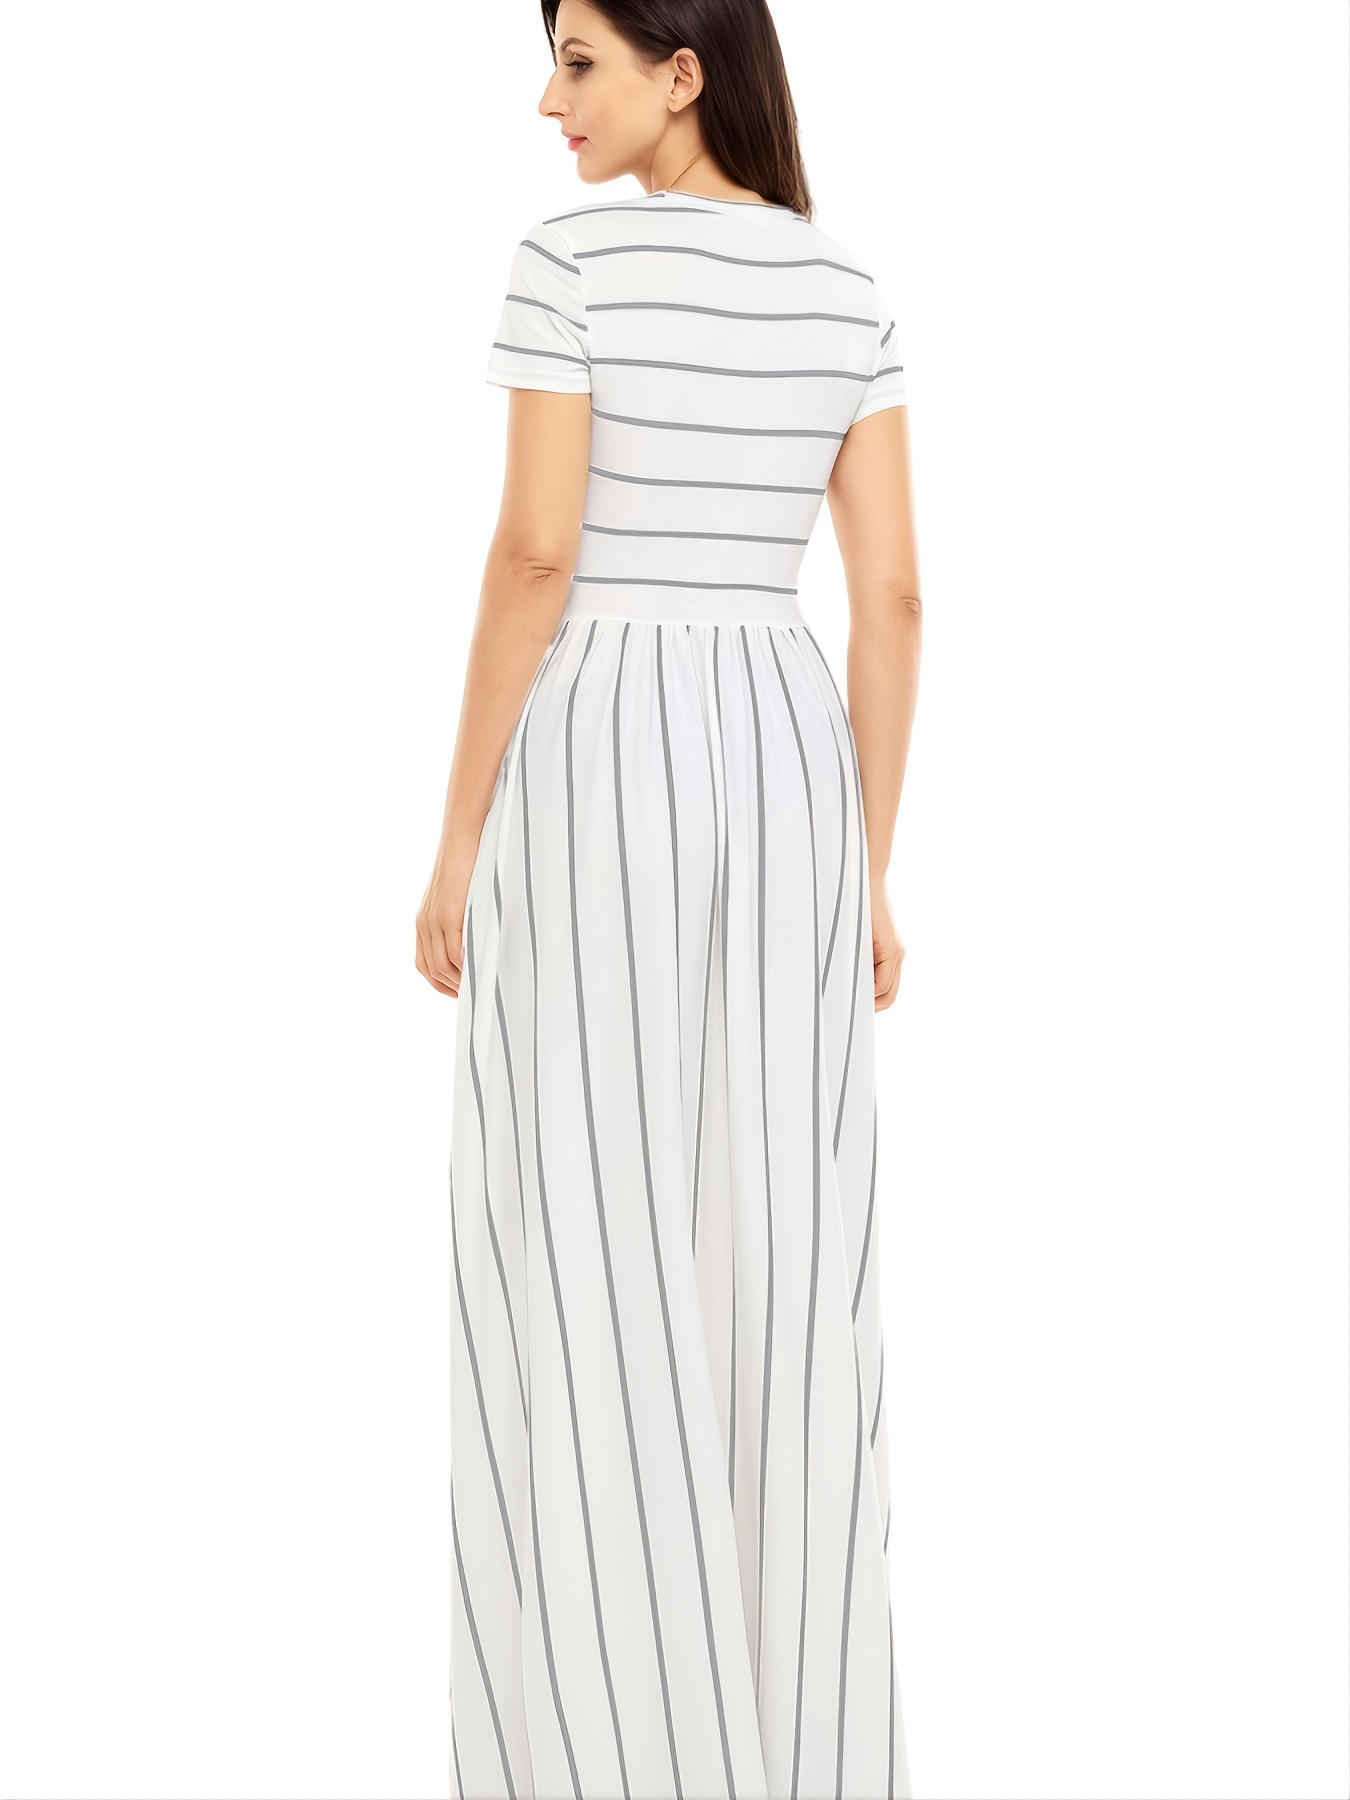 White And Blue Striped Maxi Dress